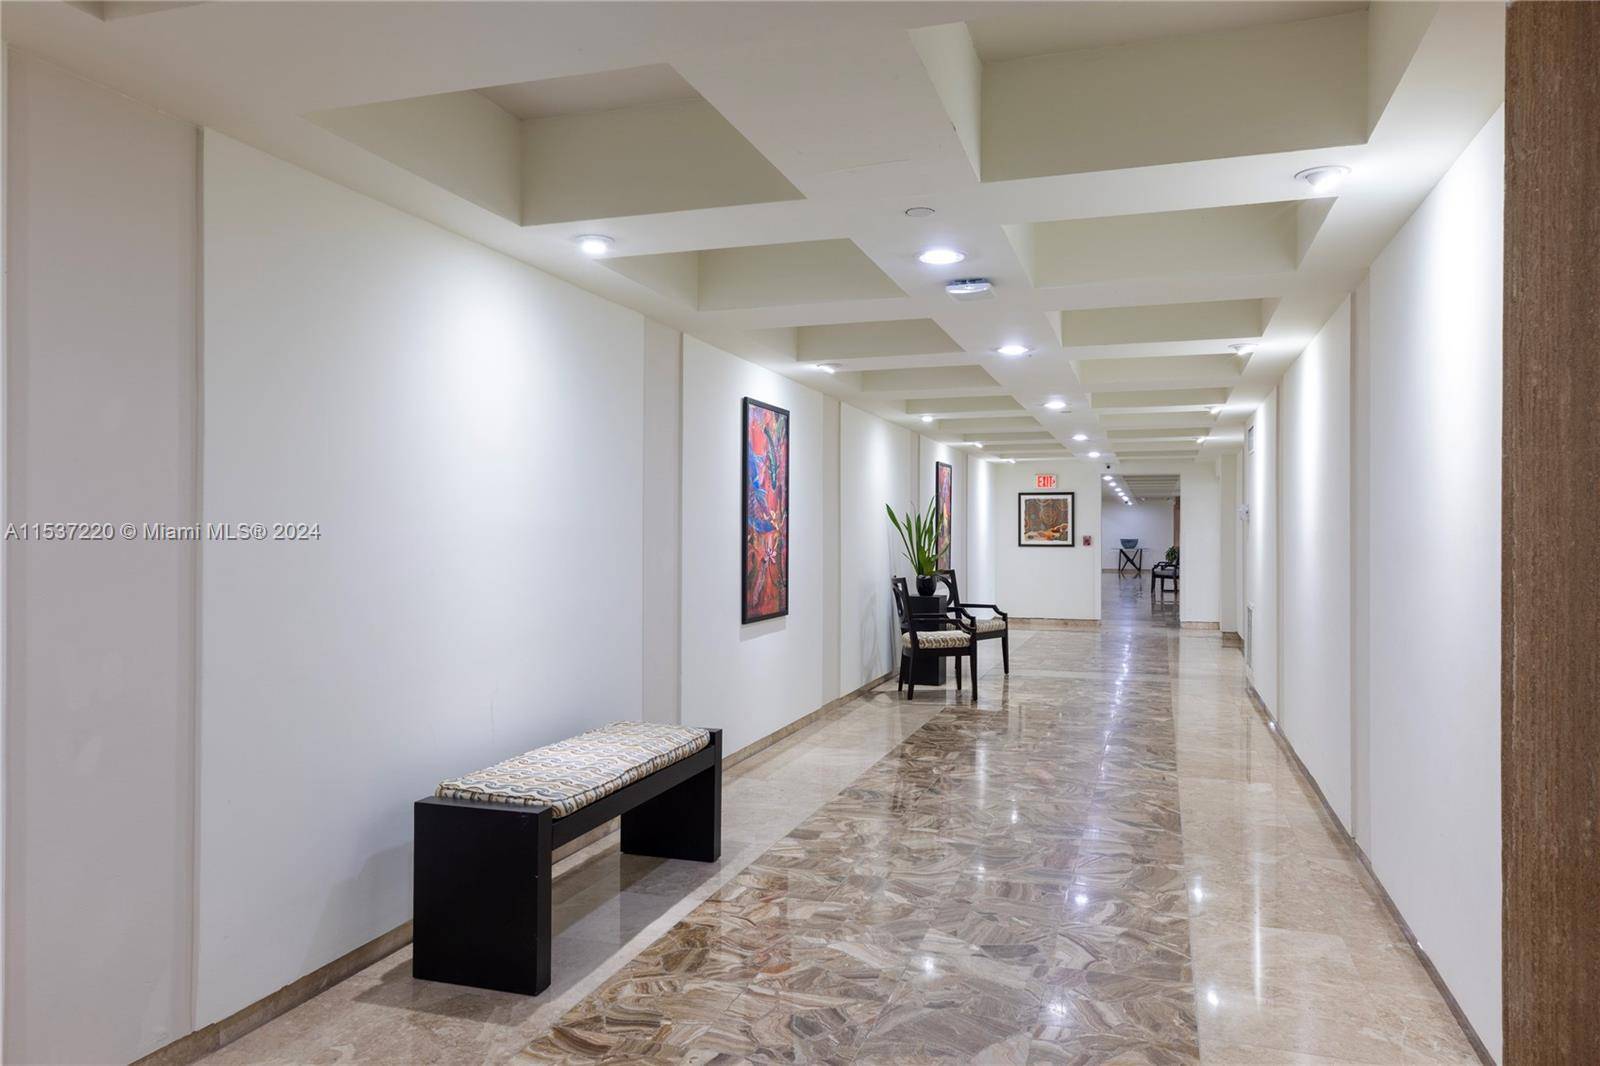 Rare unit in the F line is a highly sought after building on Millionaire's Road in Miami Beach with direct ocean view and access to the boardwalk.